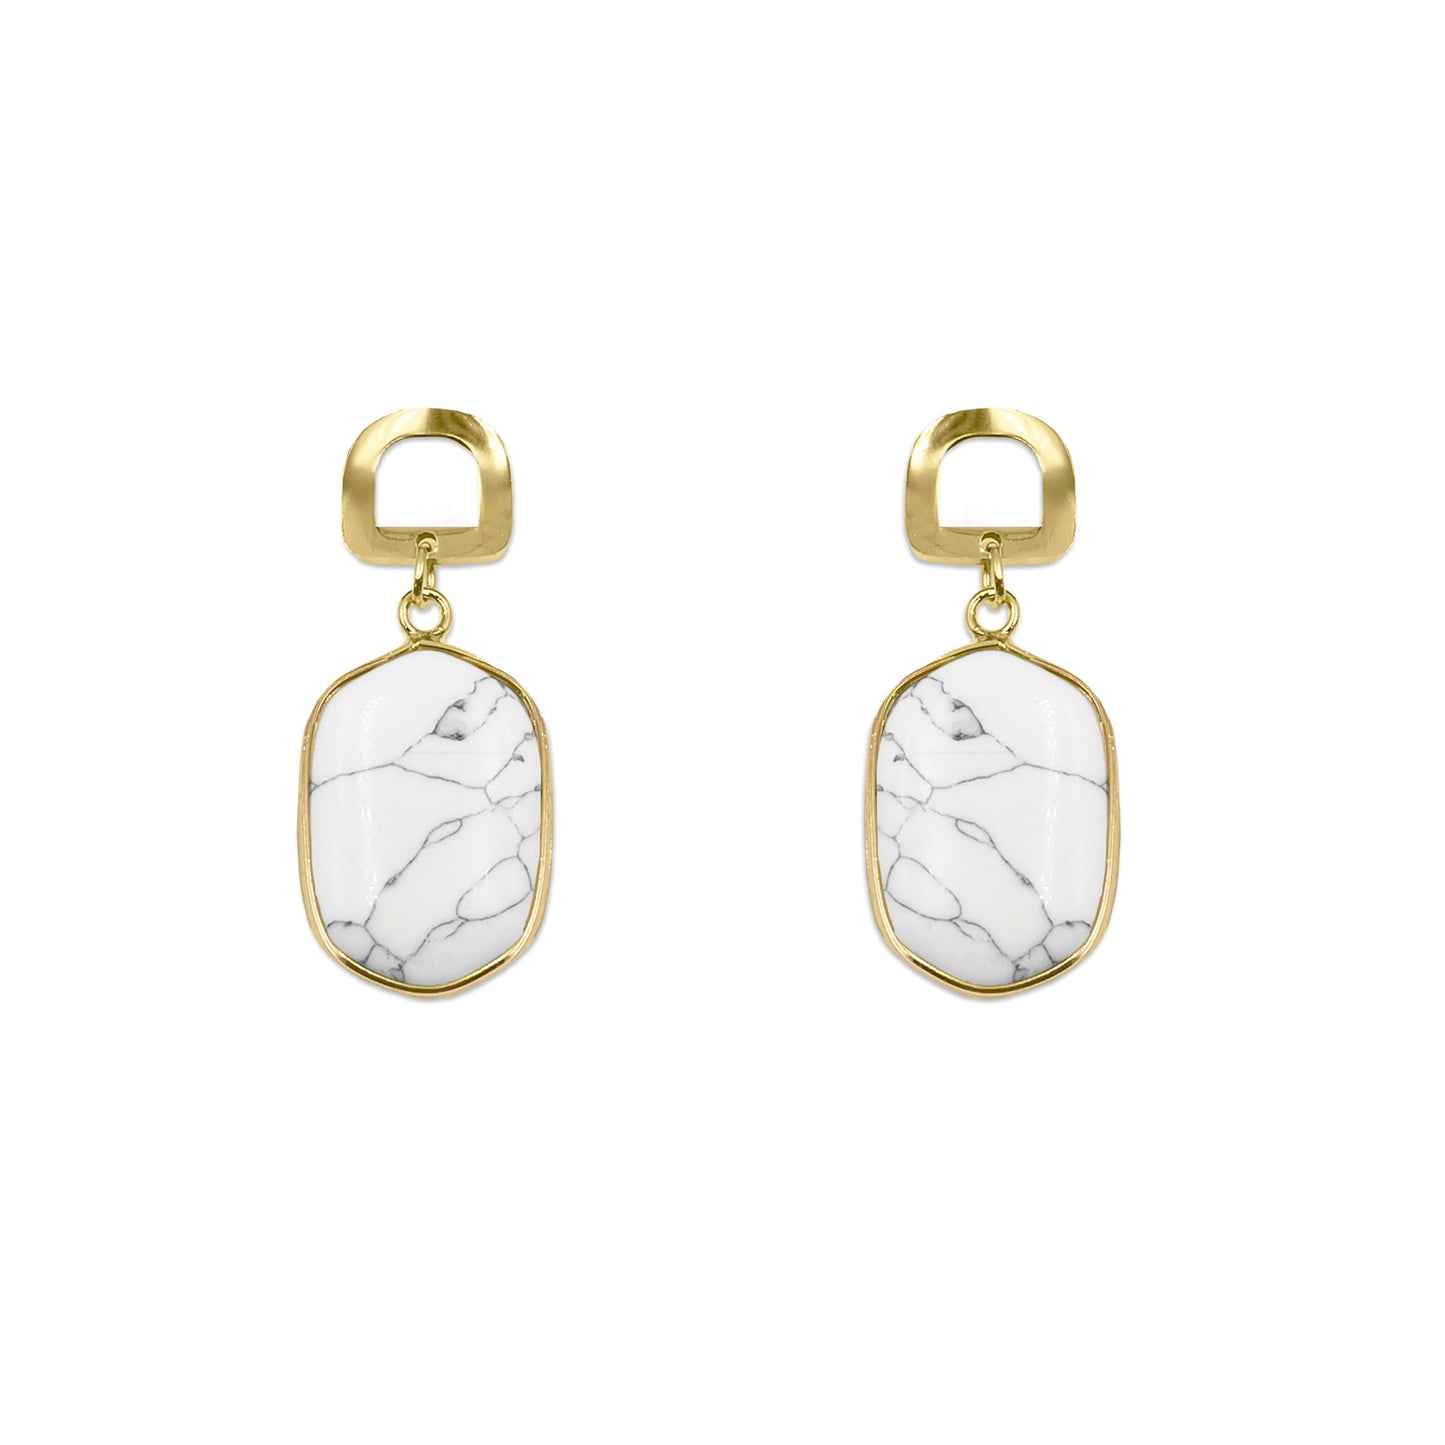 Rayna Collection - Pepper Earrings